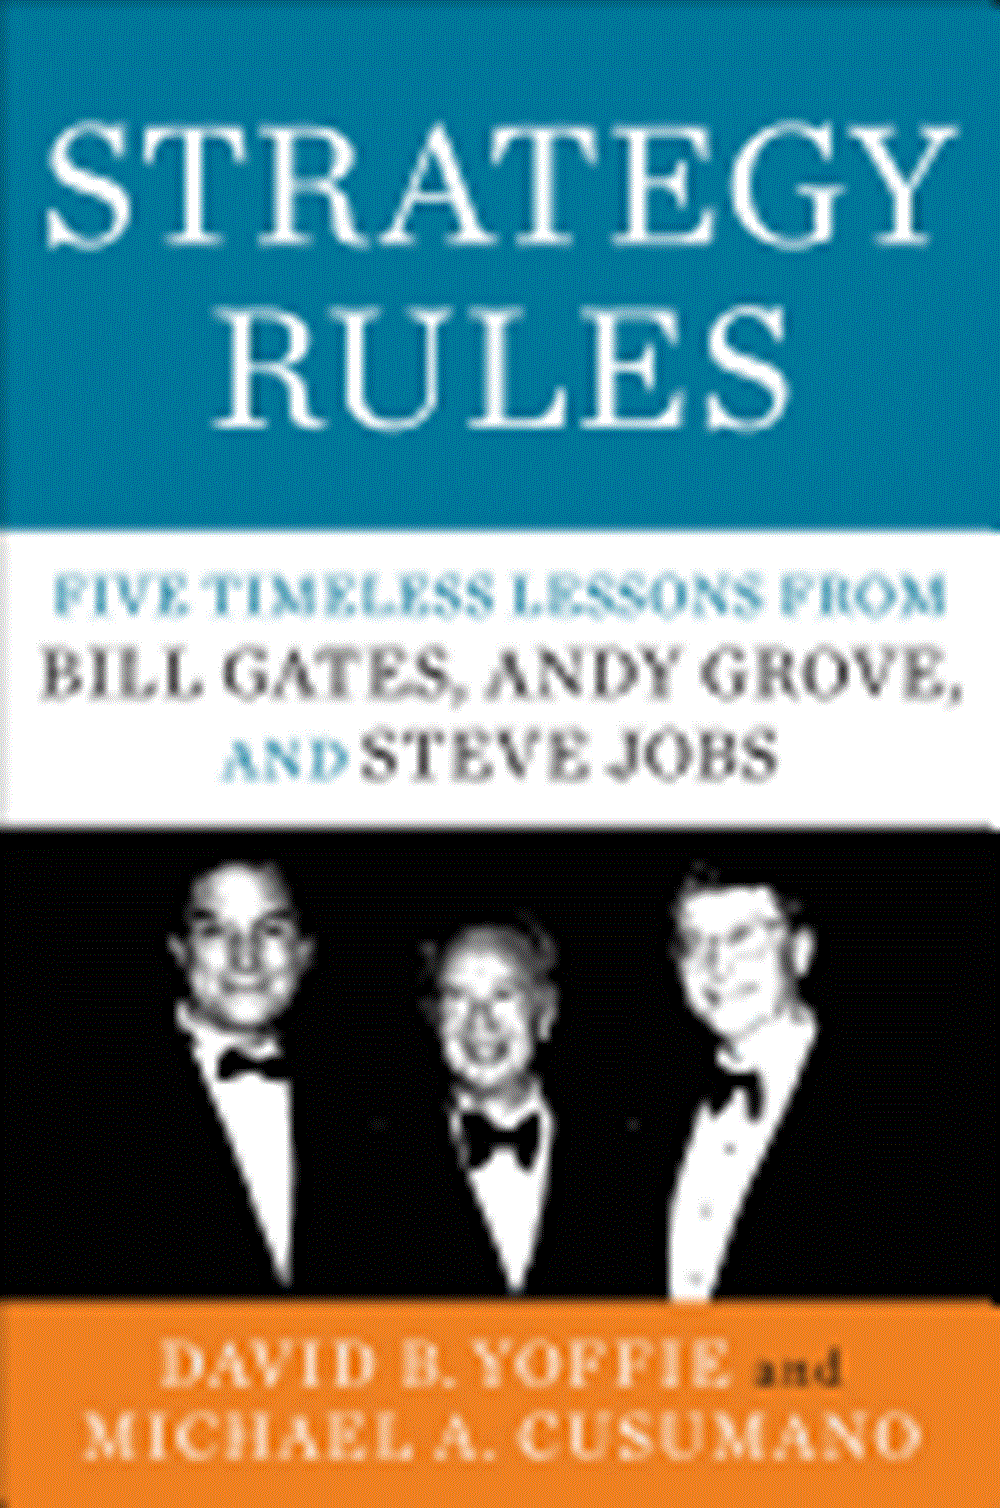 Strategy Rules Five Timeless Lessons from Bill Gates, Andy Grove, and Steve Jobs